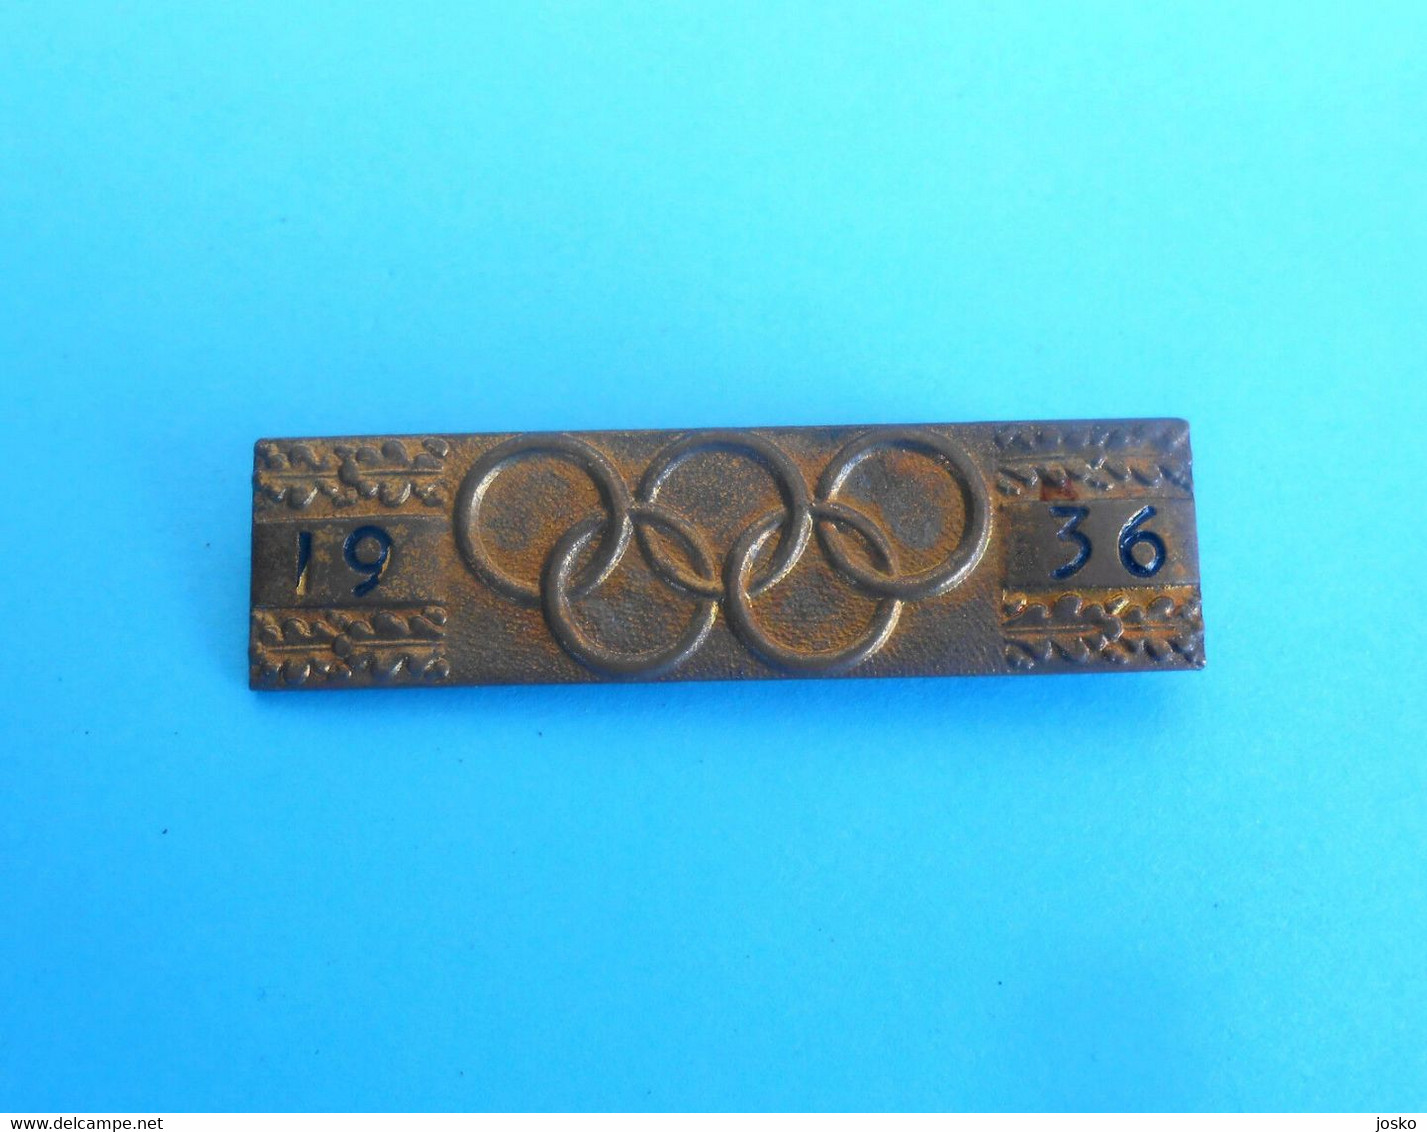 OLYMPIC GAMES BERLIN 1936 Original Vintage Pin LARGE SIZE Jeux Olympiques Olympia Olympiade Olympiad Germany Deutschland - Apparel, Souvenirs & Other